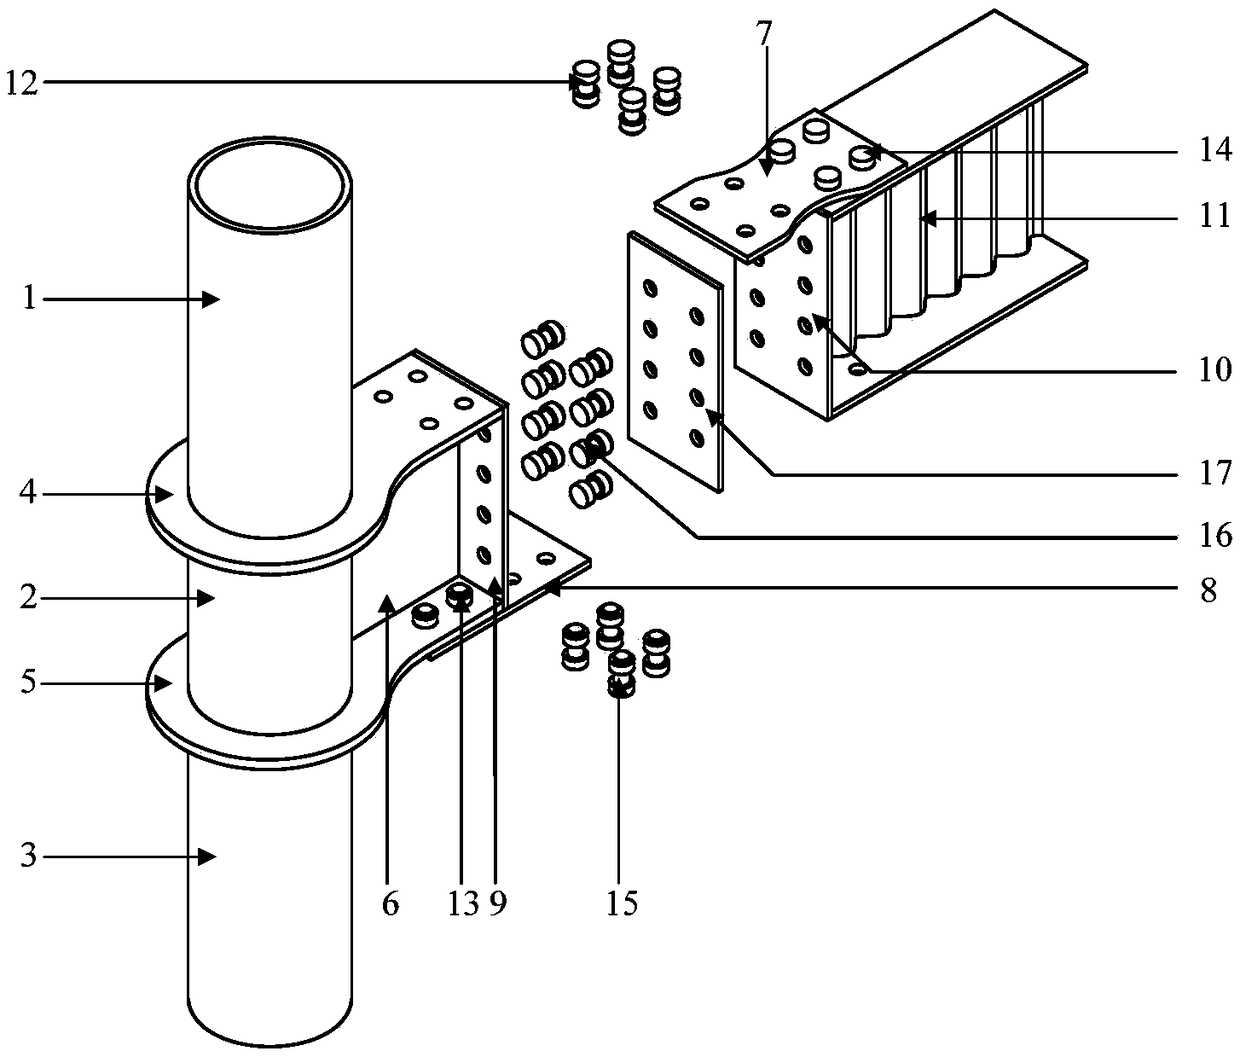 A beam-to-column joint connection device of a cover plate weakened assembled corrugated web